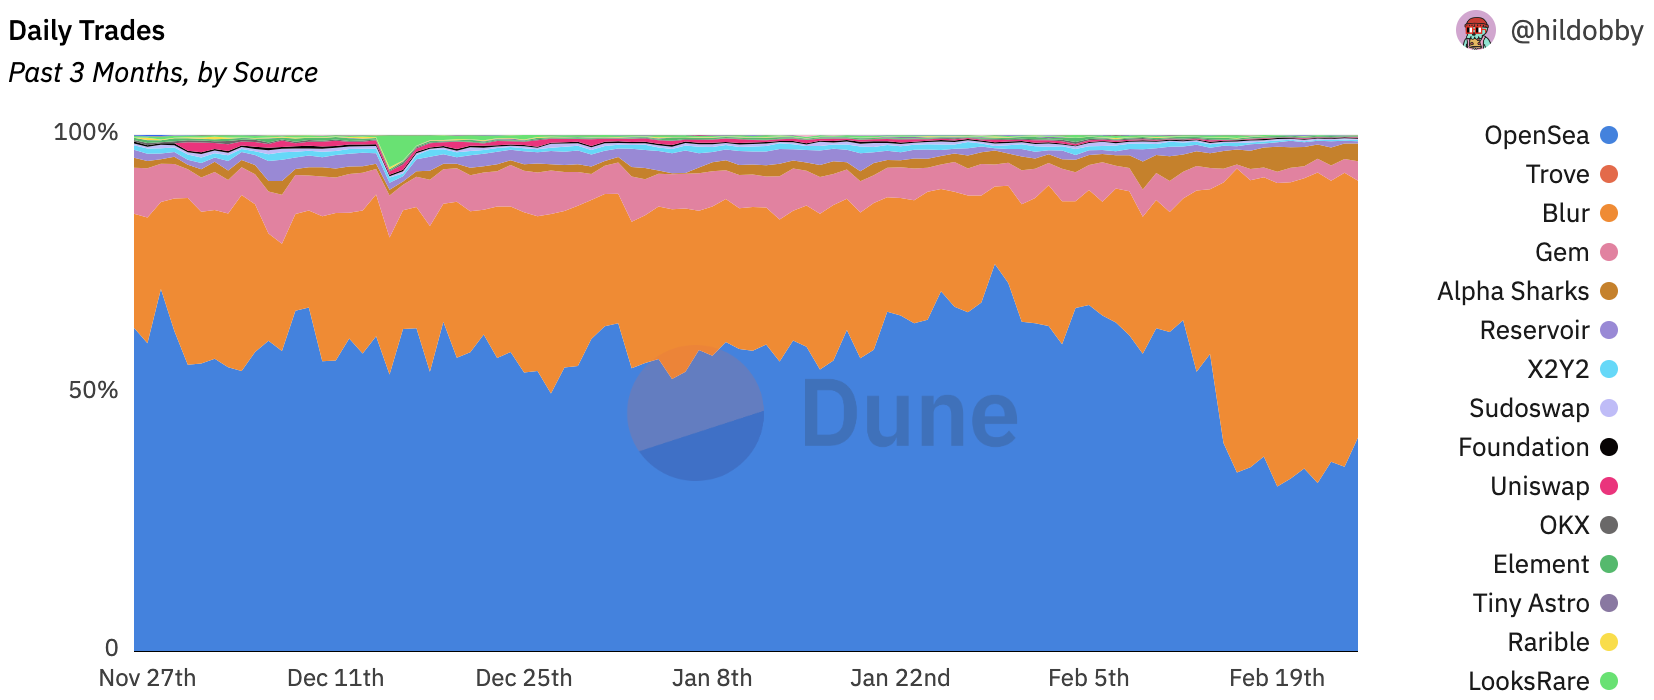 Daily NFT trading volume over the past three months by marketplace (https://dune.com/hildobby/NFTs)